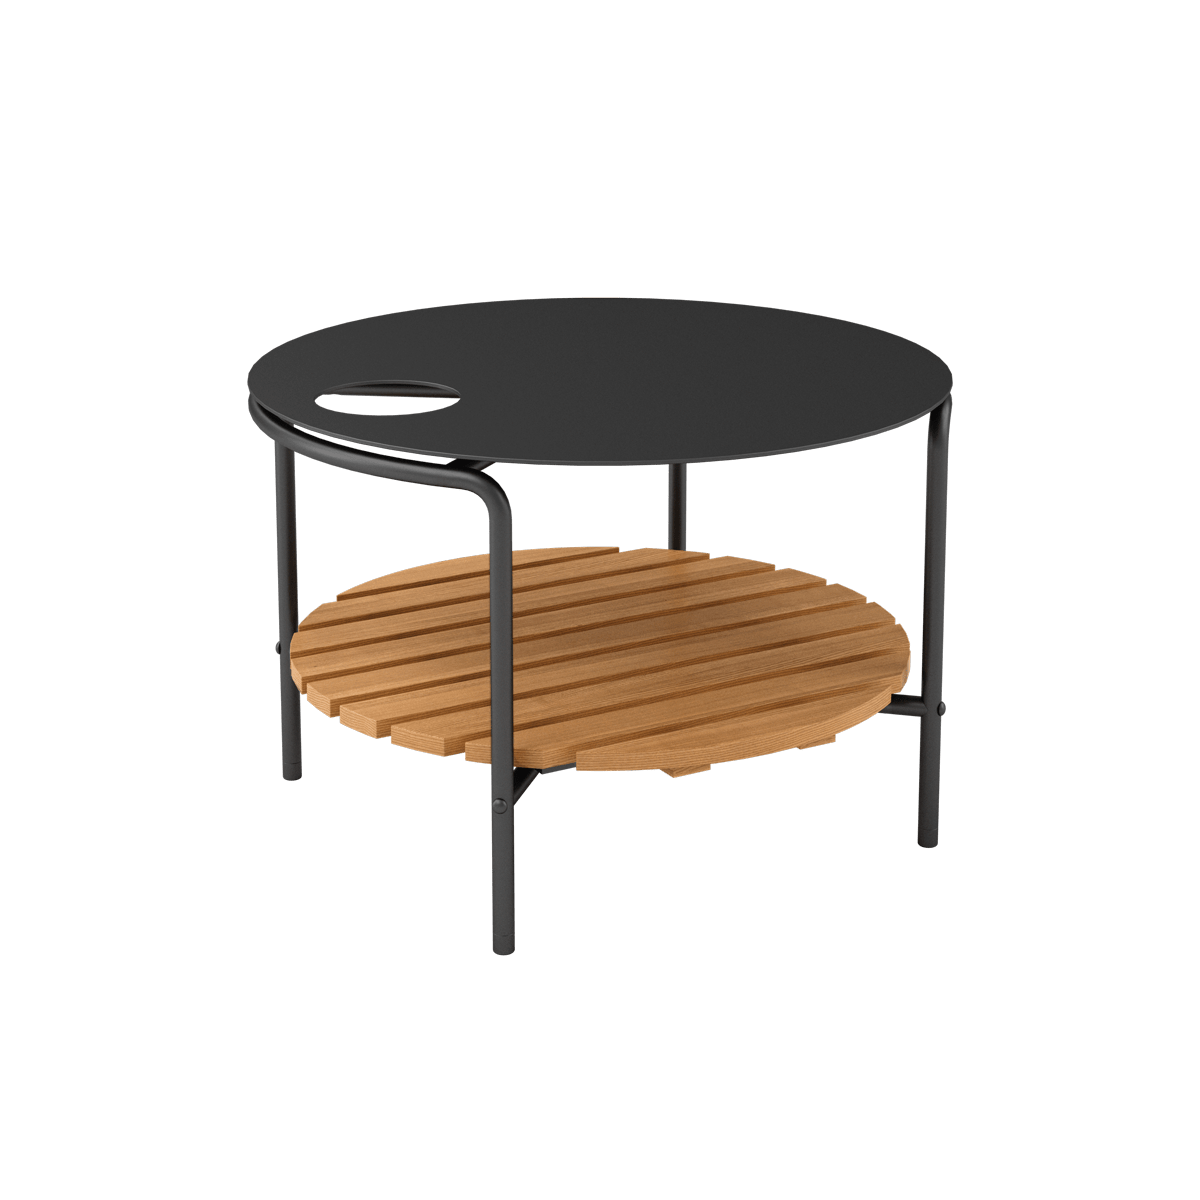 variant_8583515% | Patio Sofa Table - Ø70 - Med Accessory Fit | SACKit